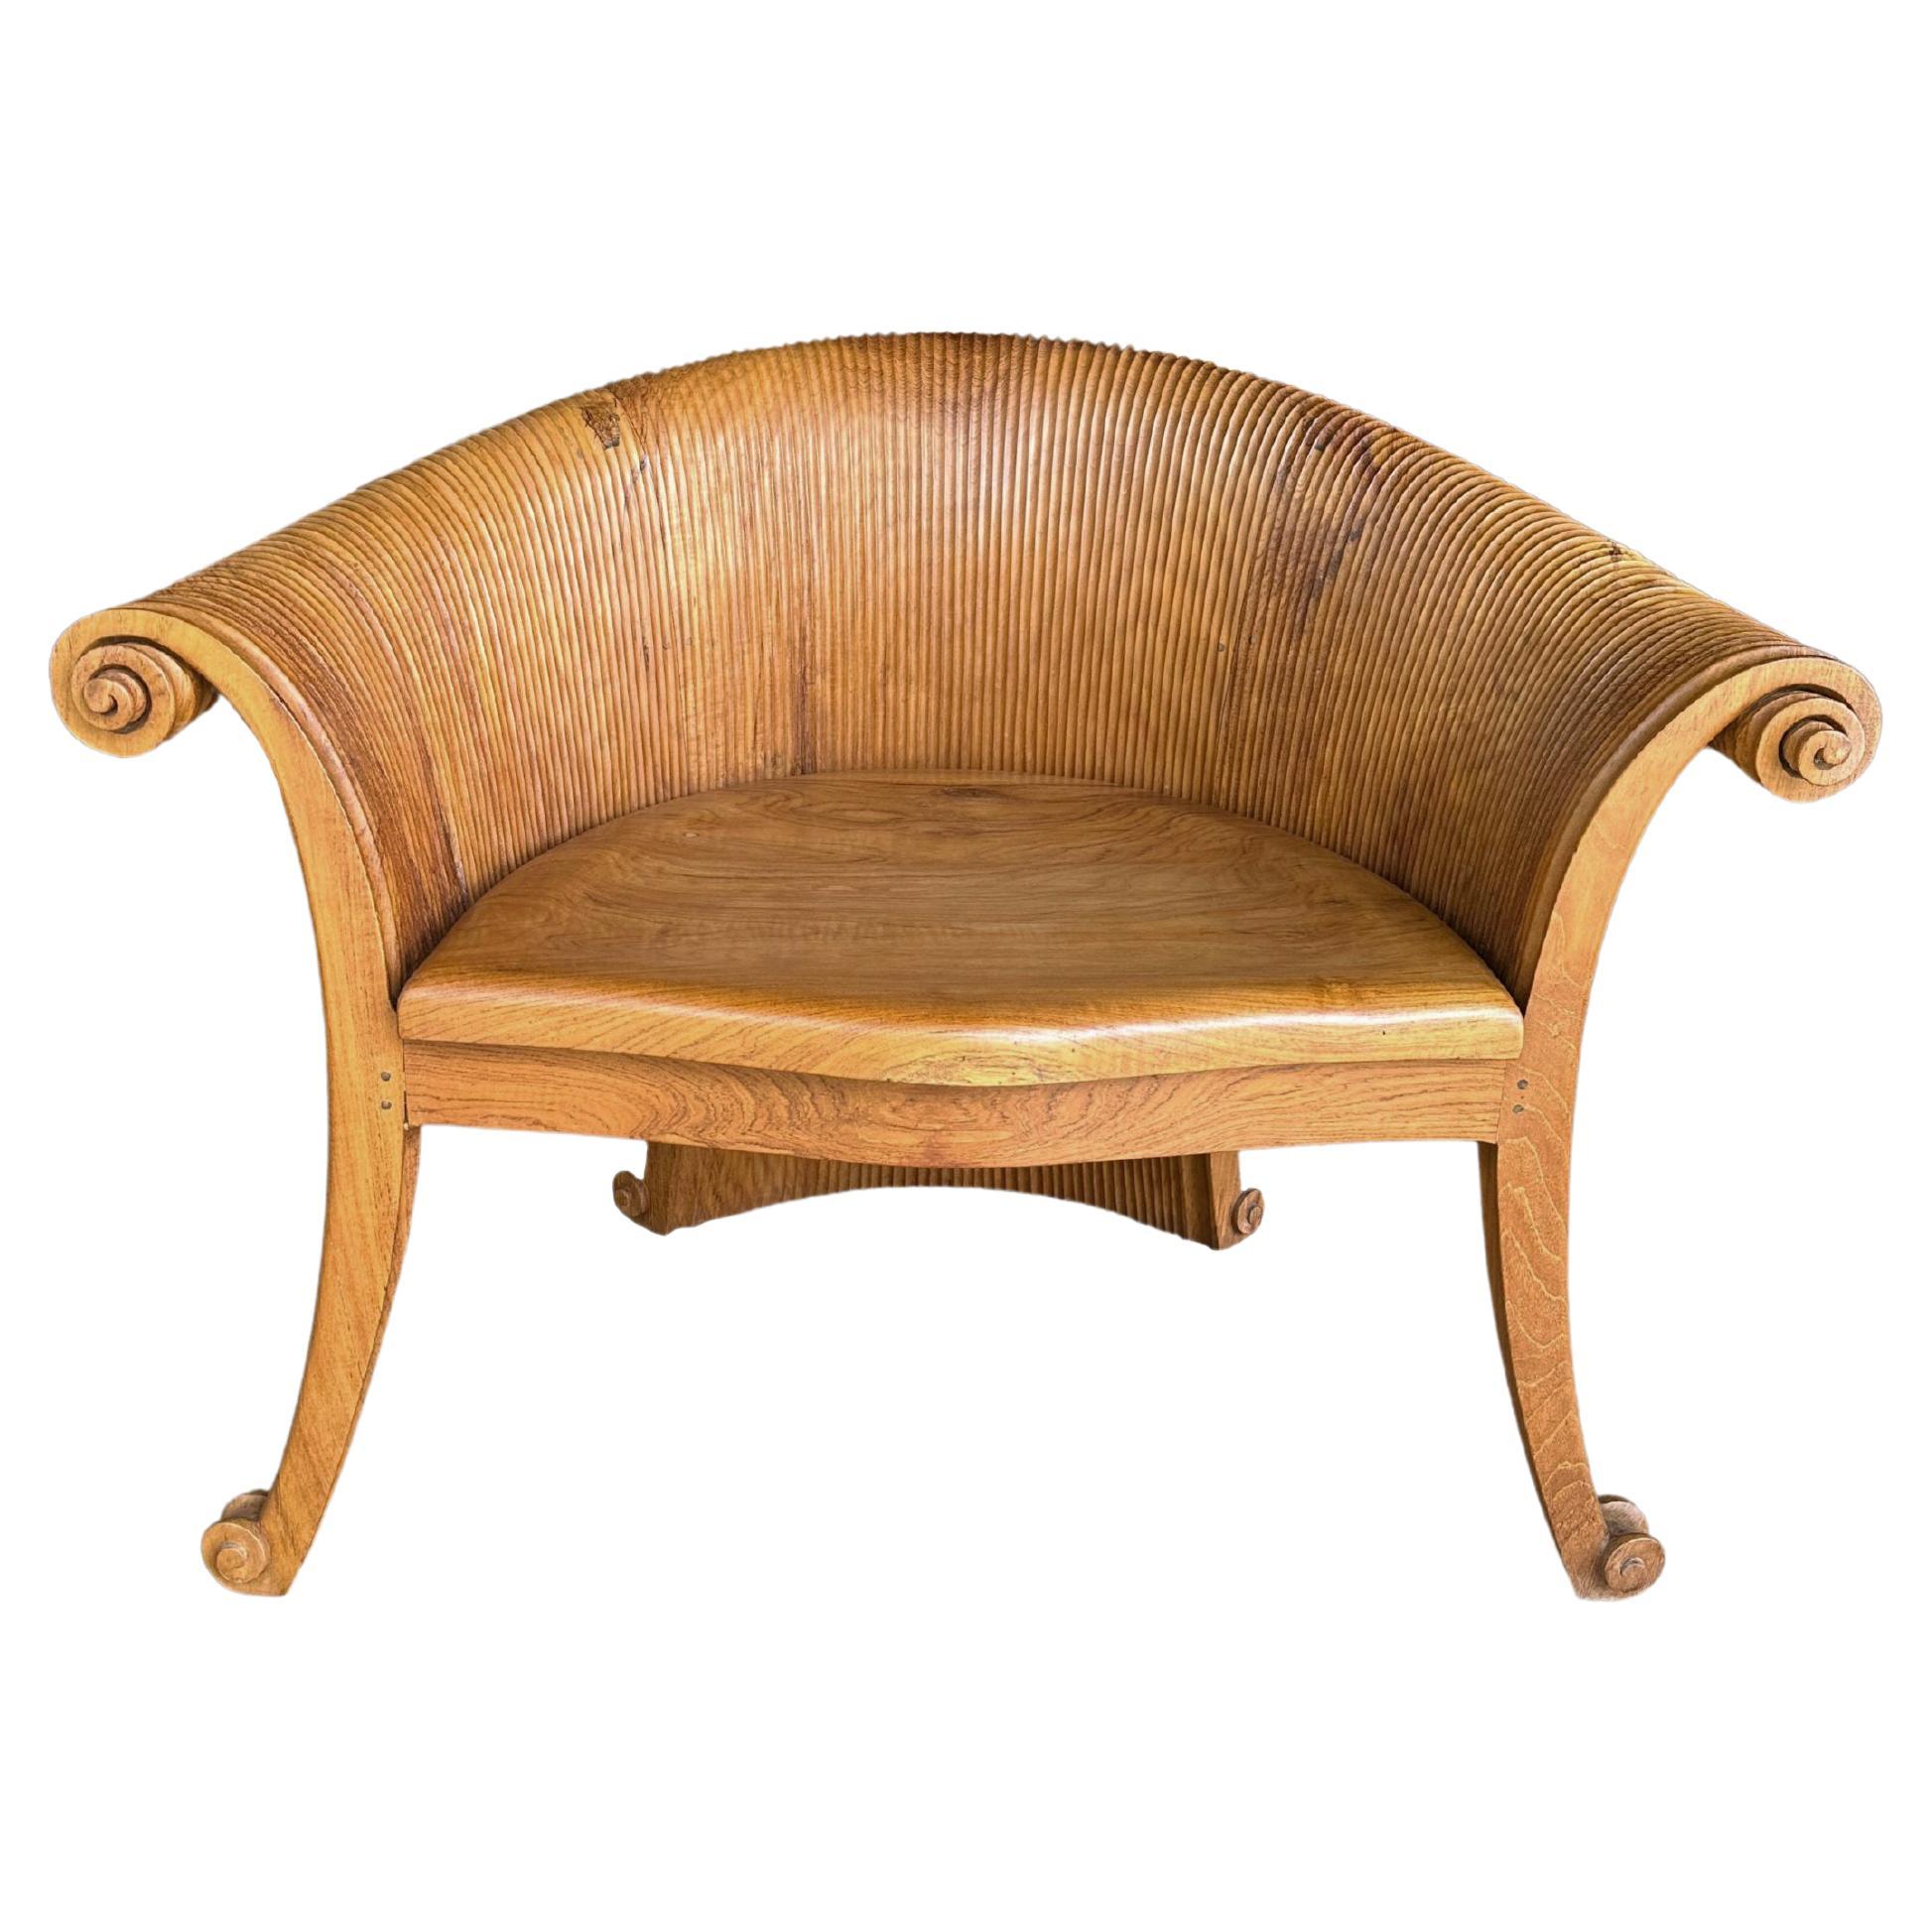 Sculptural Teak Wood Chair with Carved Detailing For Sale